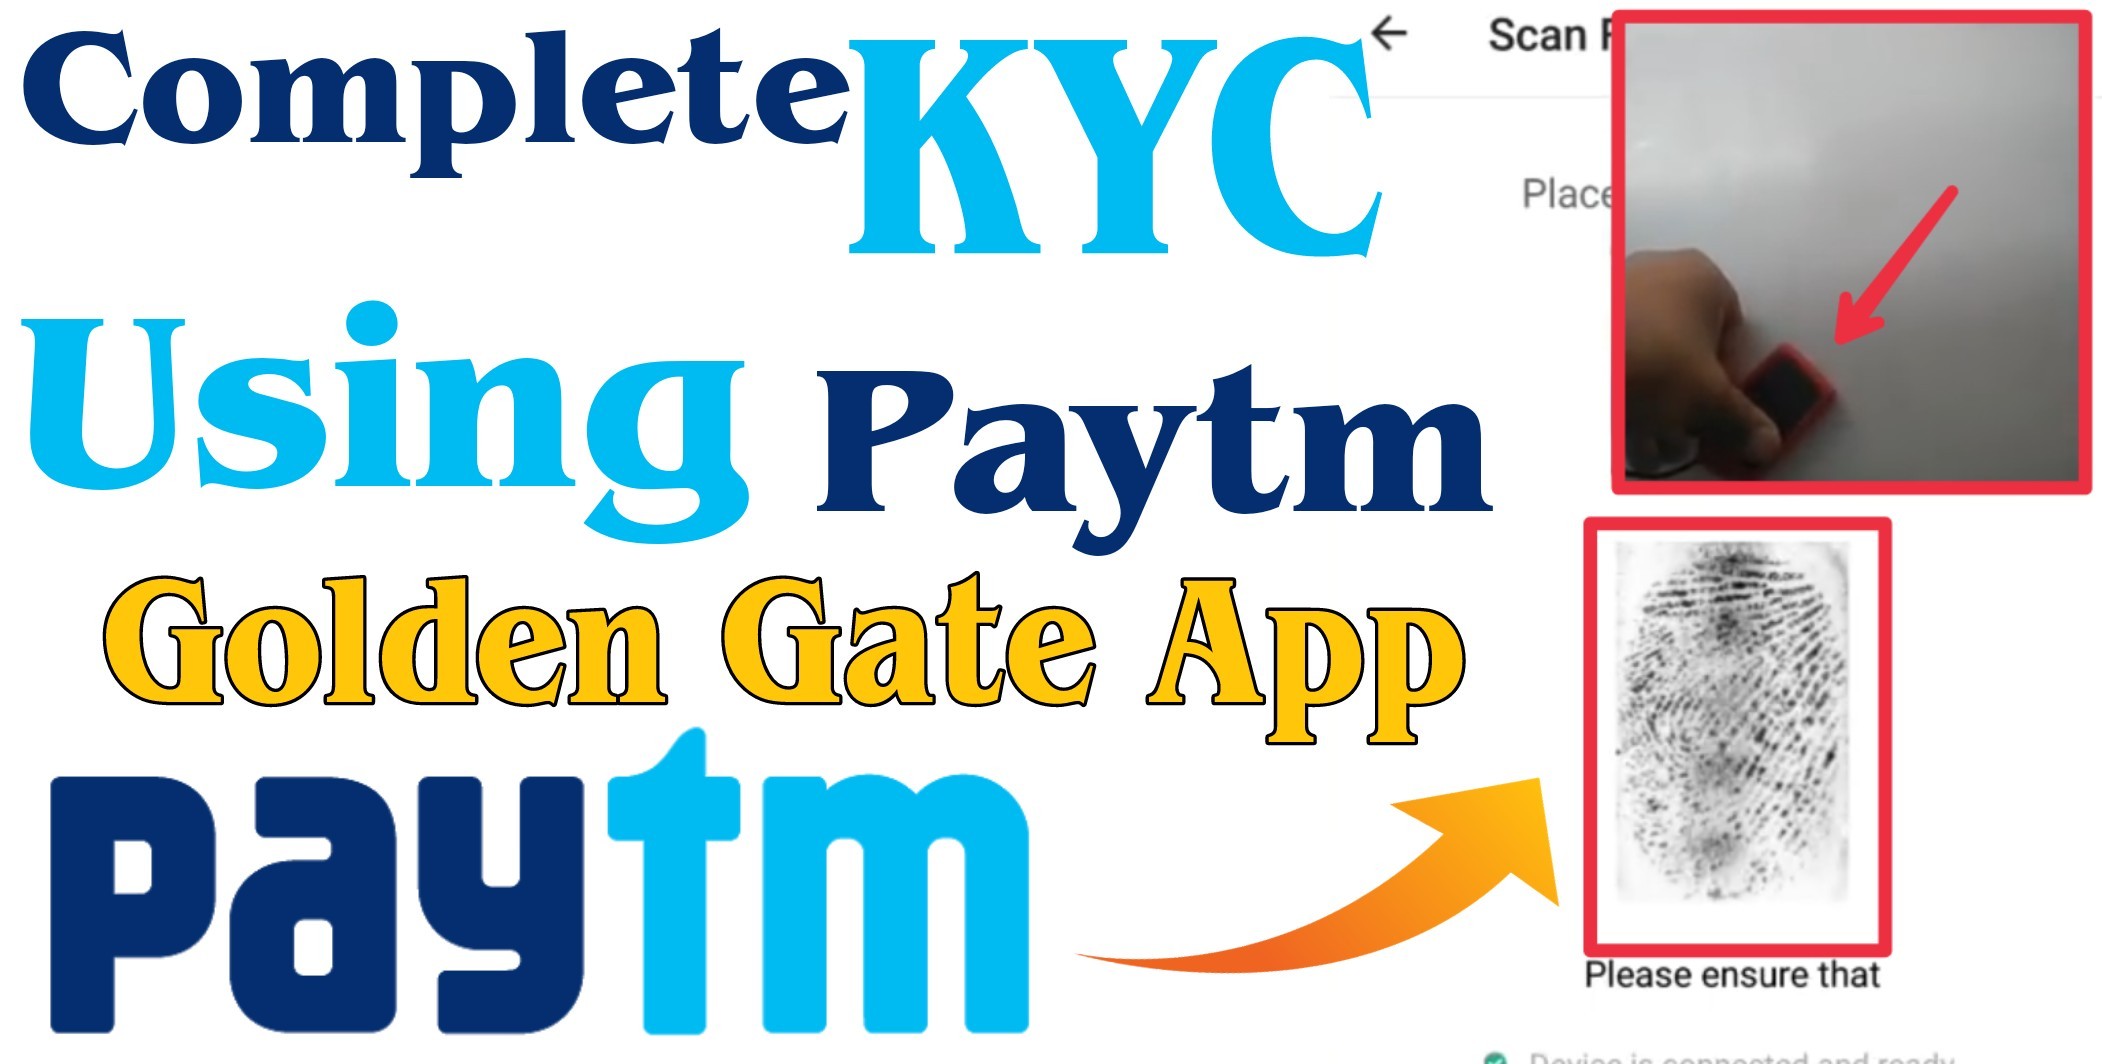 Paytm Golden Gate App KYC - How to Complete Paytm KYC & Get Pending Cashback